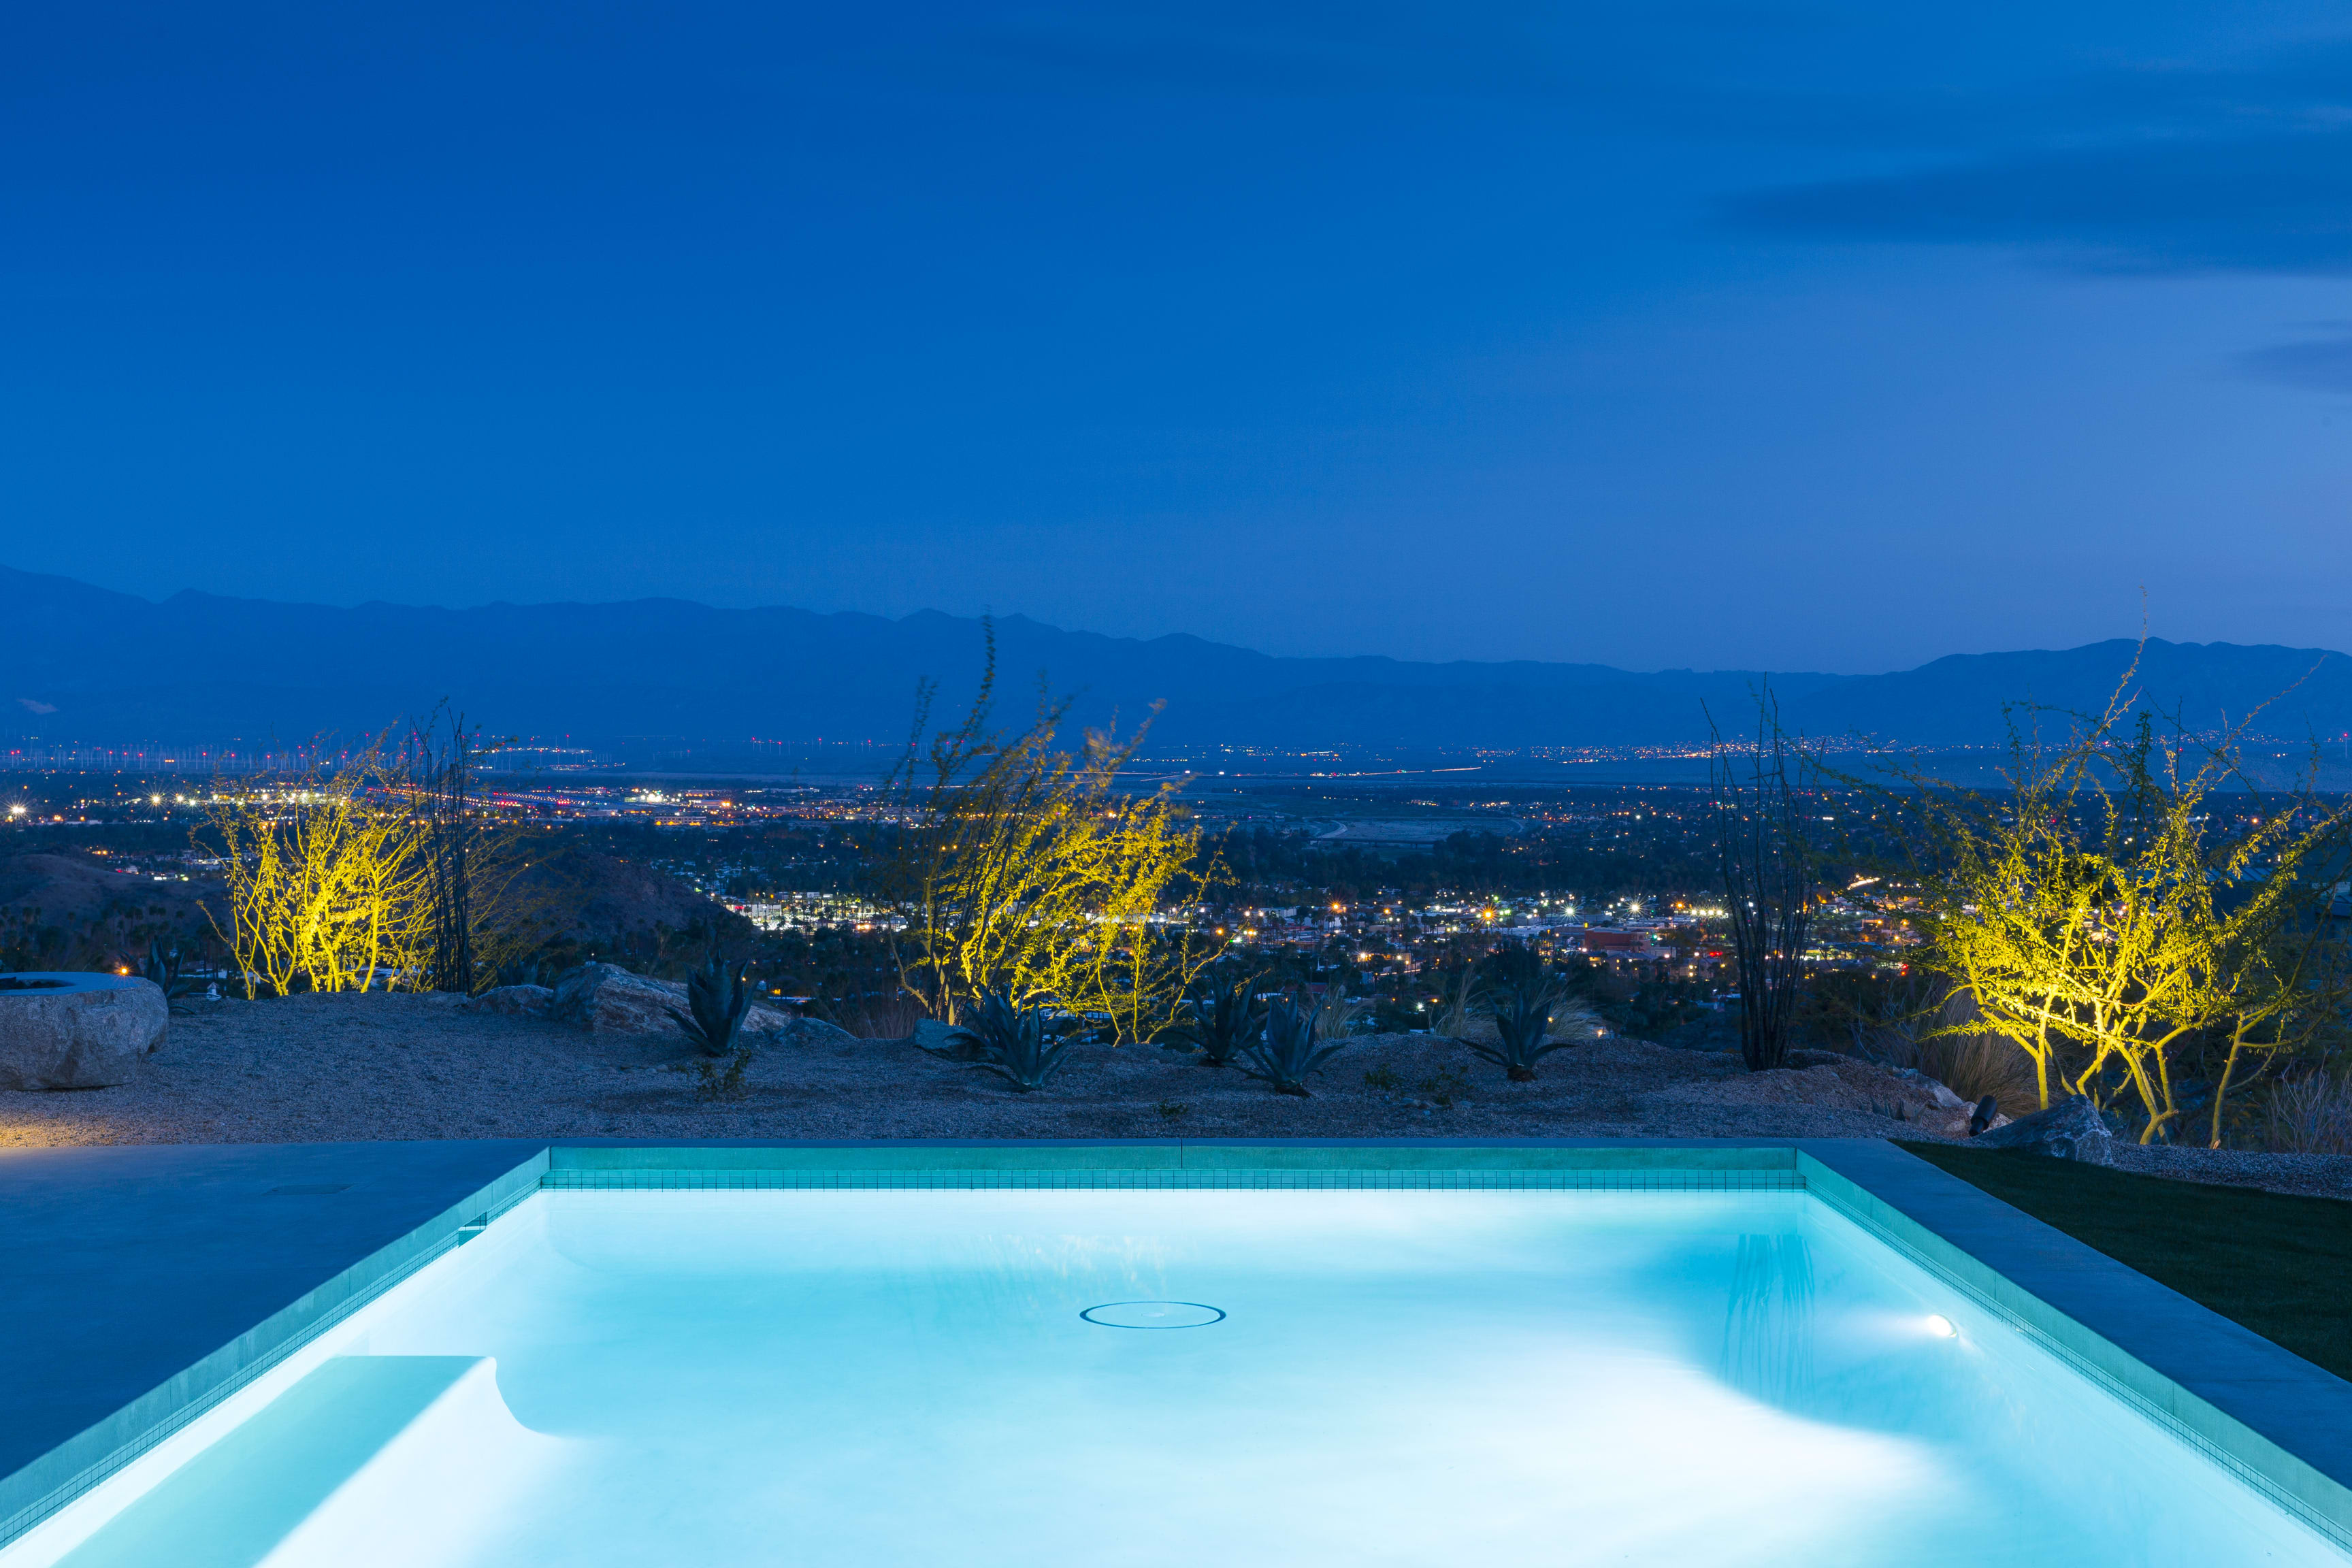 A long, infinity pool stretches out towards the city lights